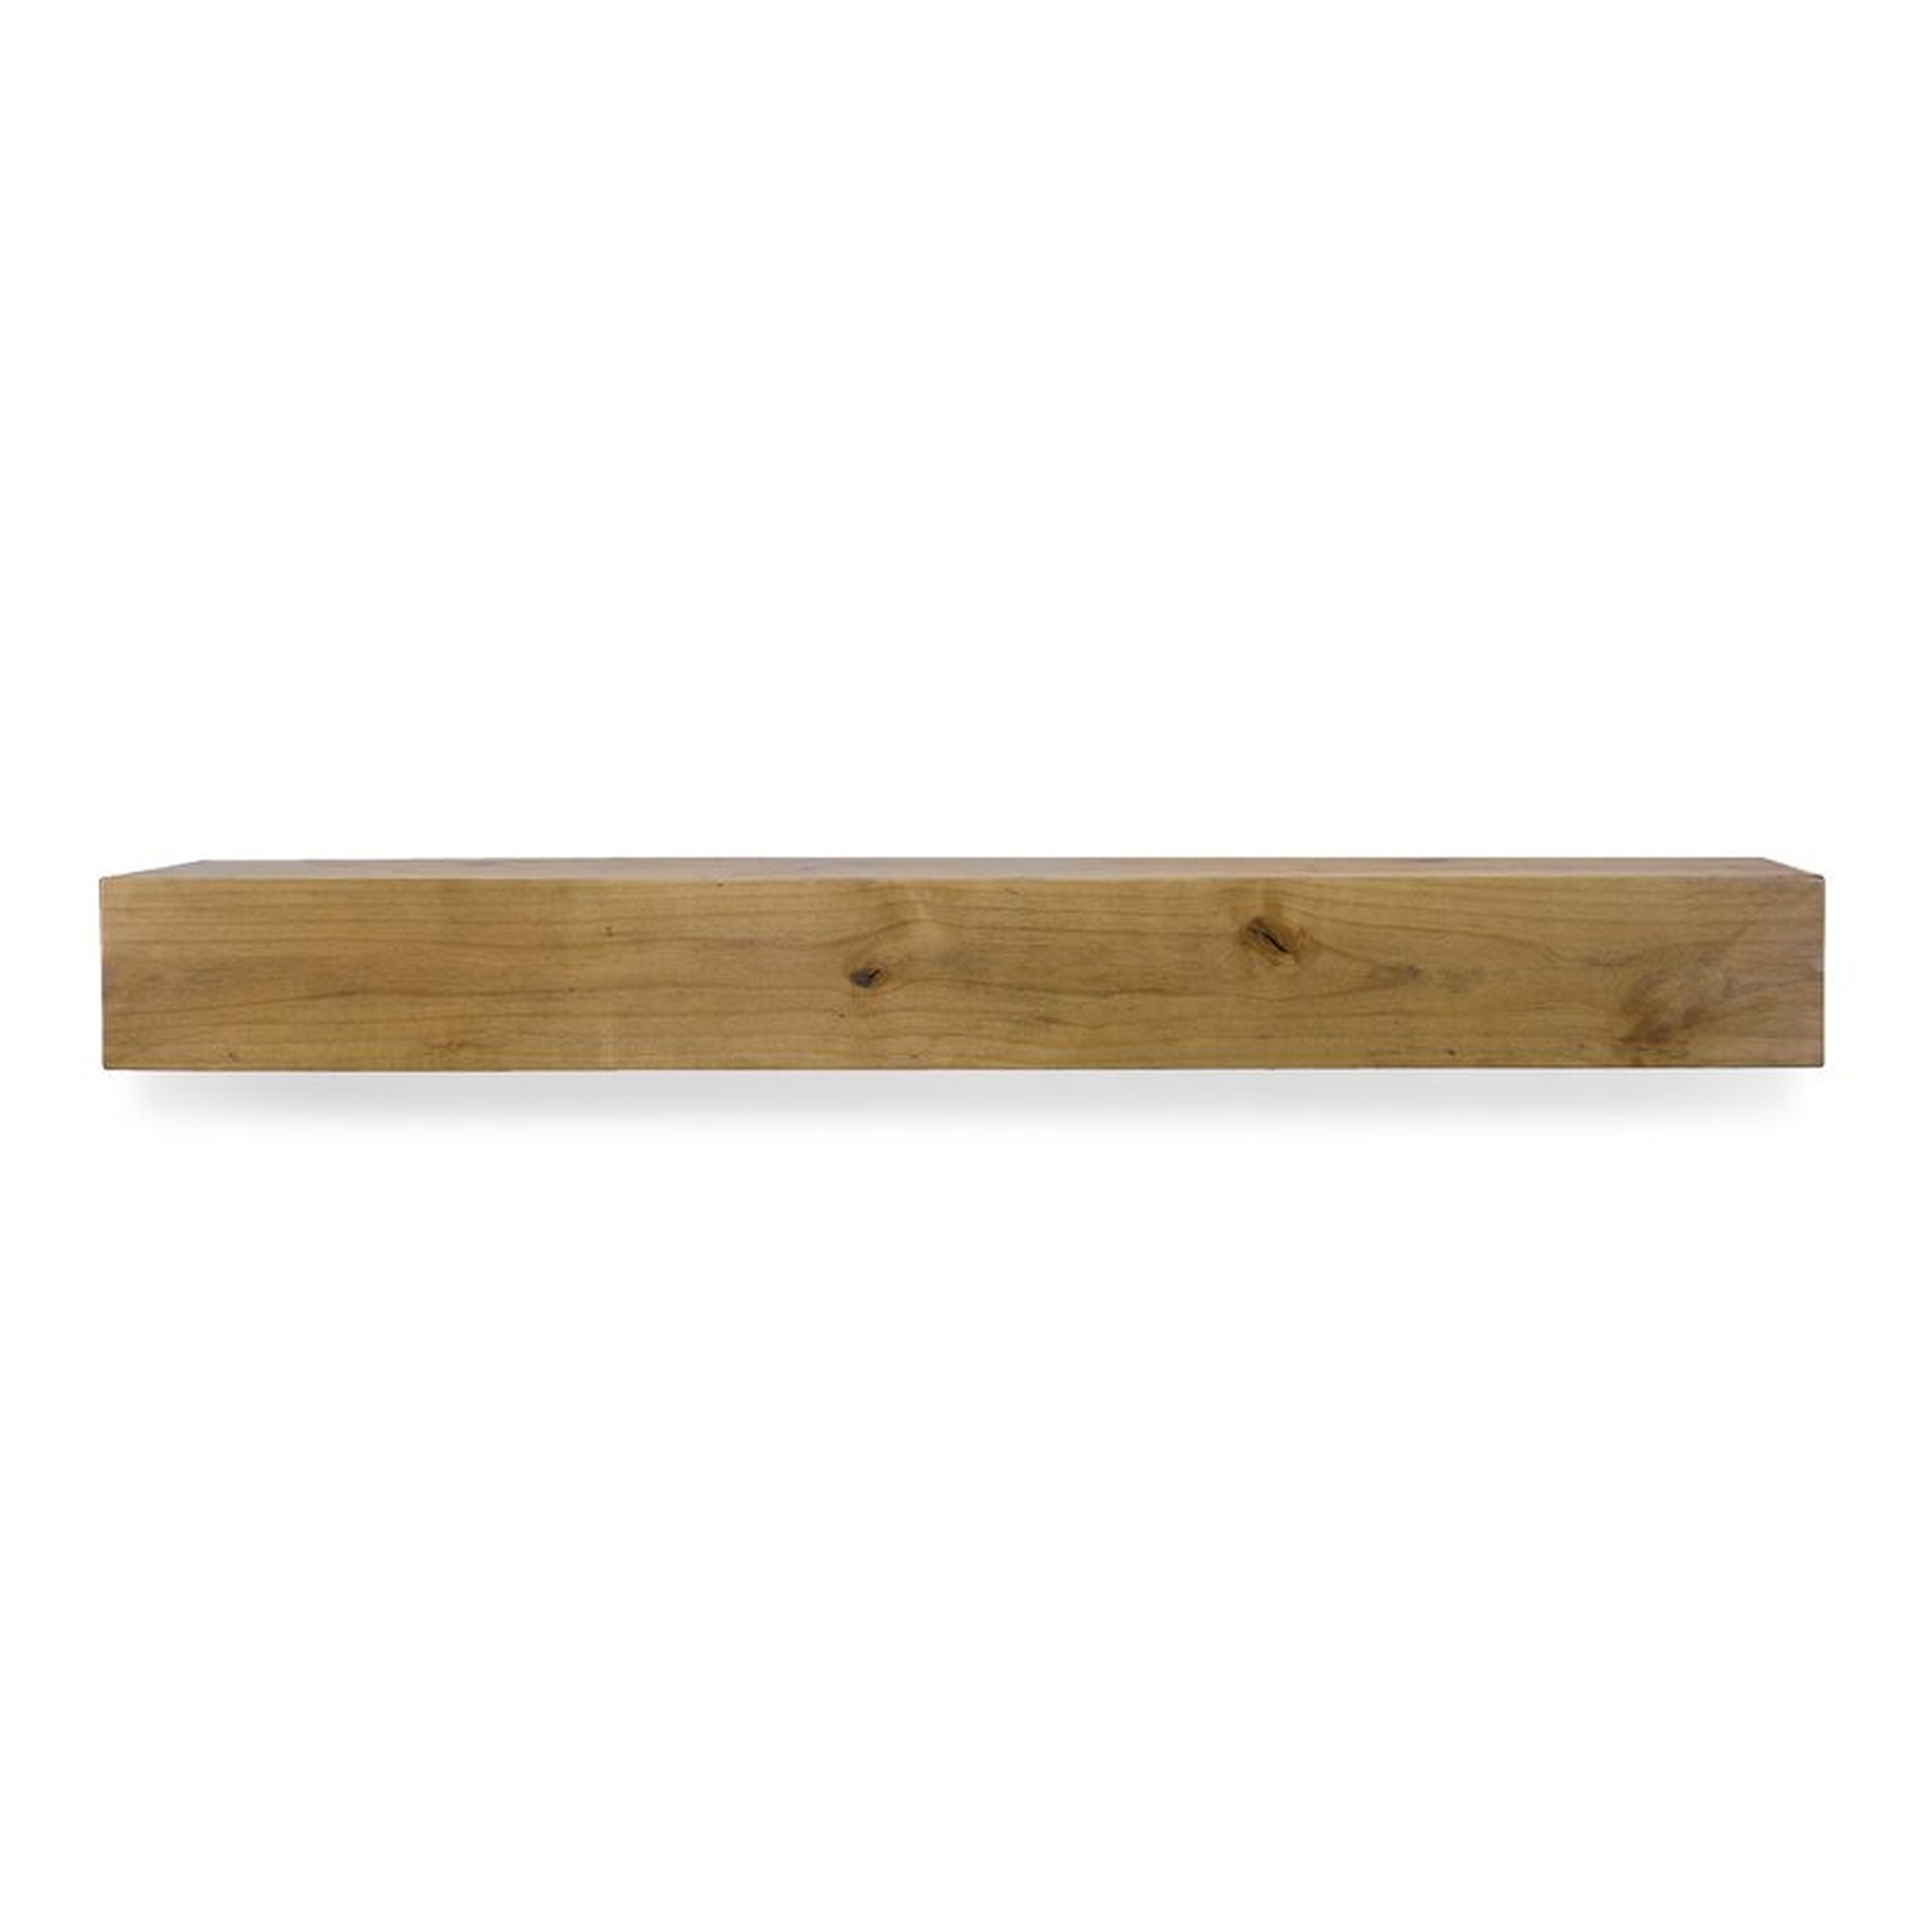 Dogberry Collections Modern Farmhouse Fireplace Shelf Mantel in Aged Oak Stain - 60" - Wayfair